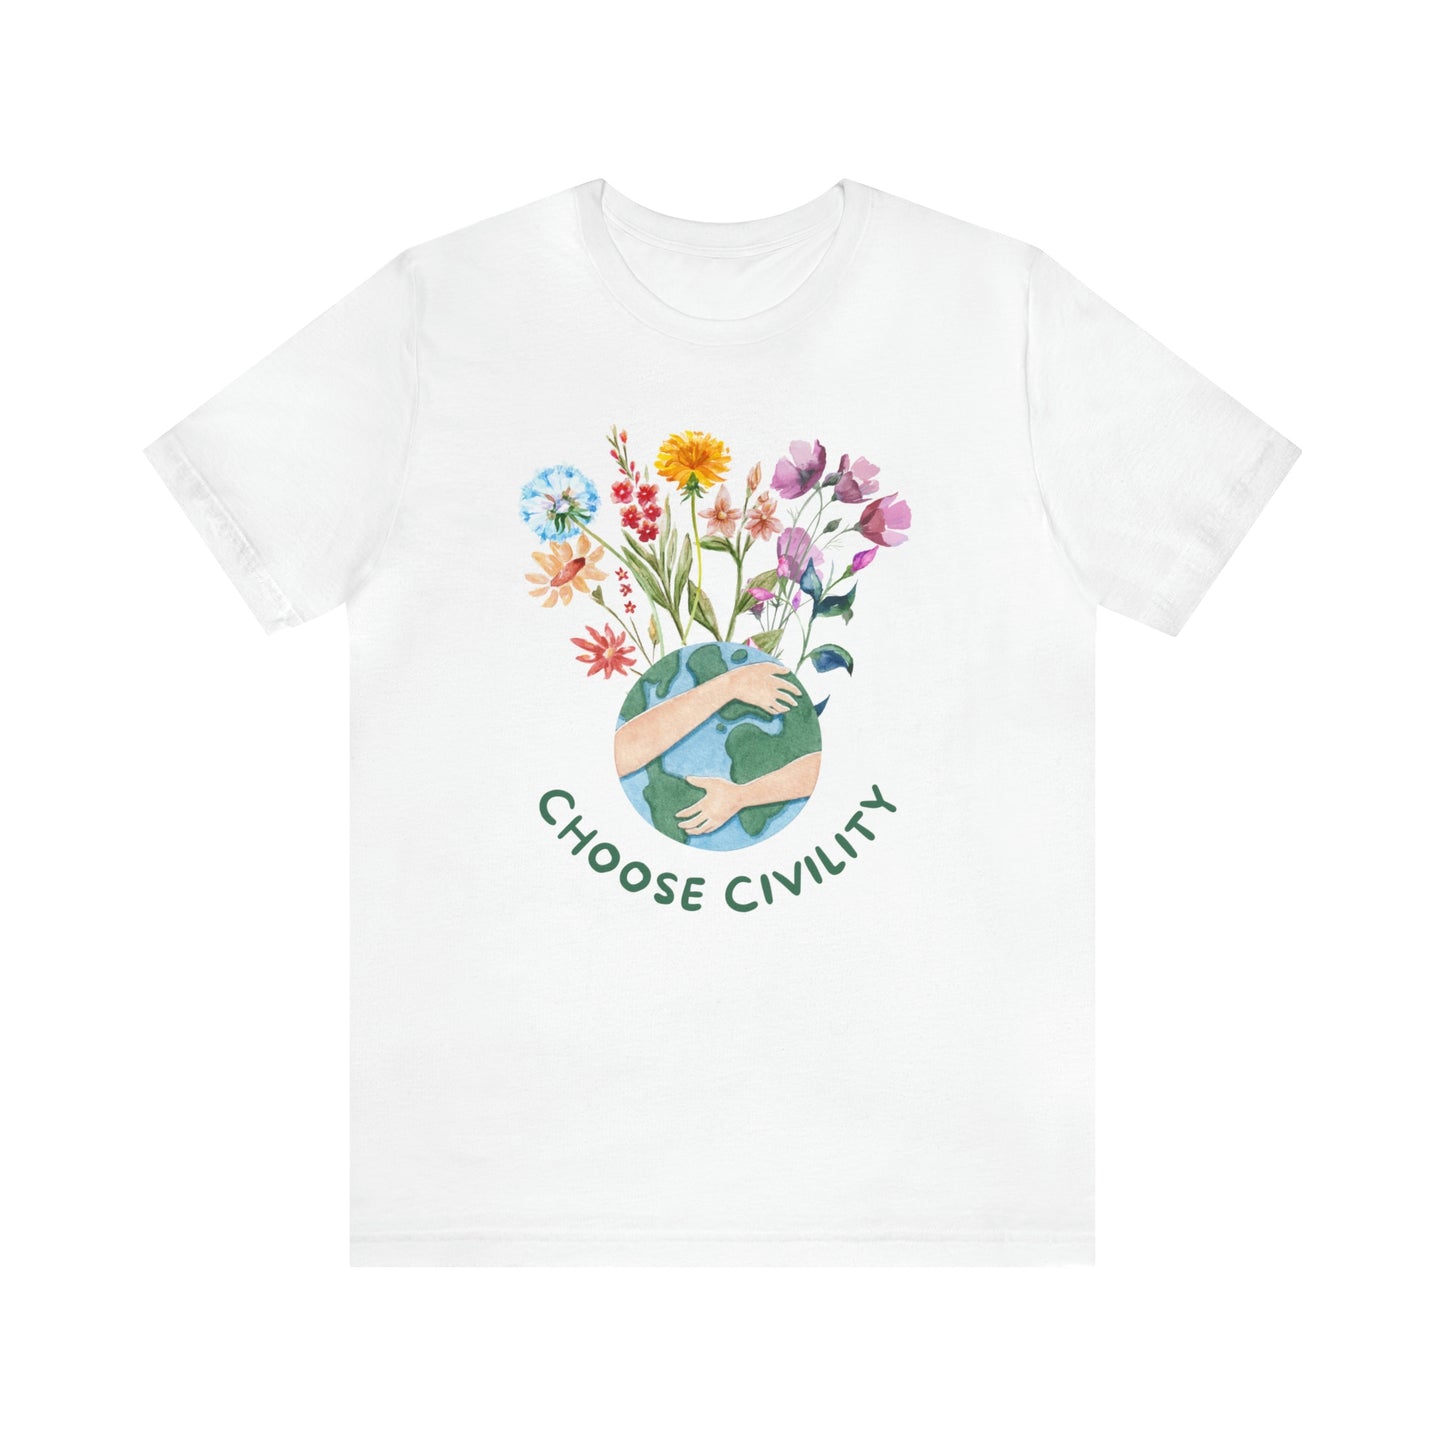 Choose Civility T-Shirt - Save the Earth